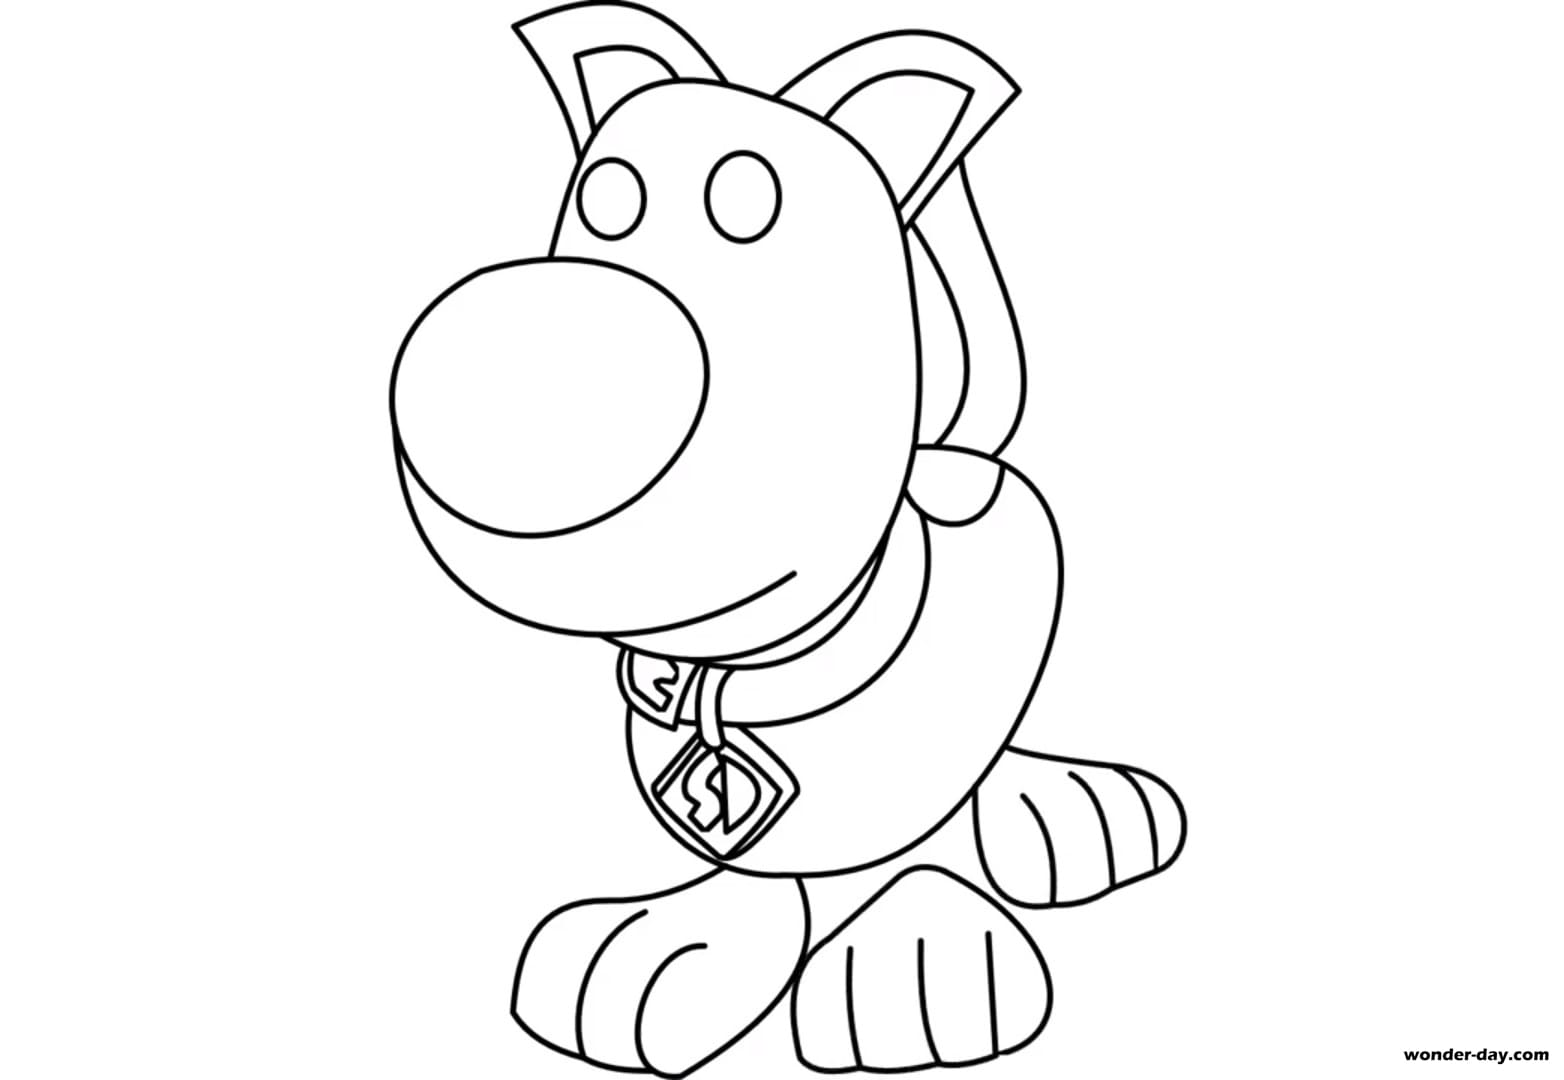 Adopt Me Coloring Pages Coloring Home - roblox adopt me pets coloring pages